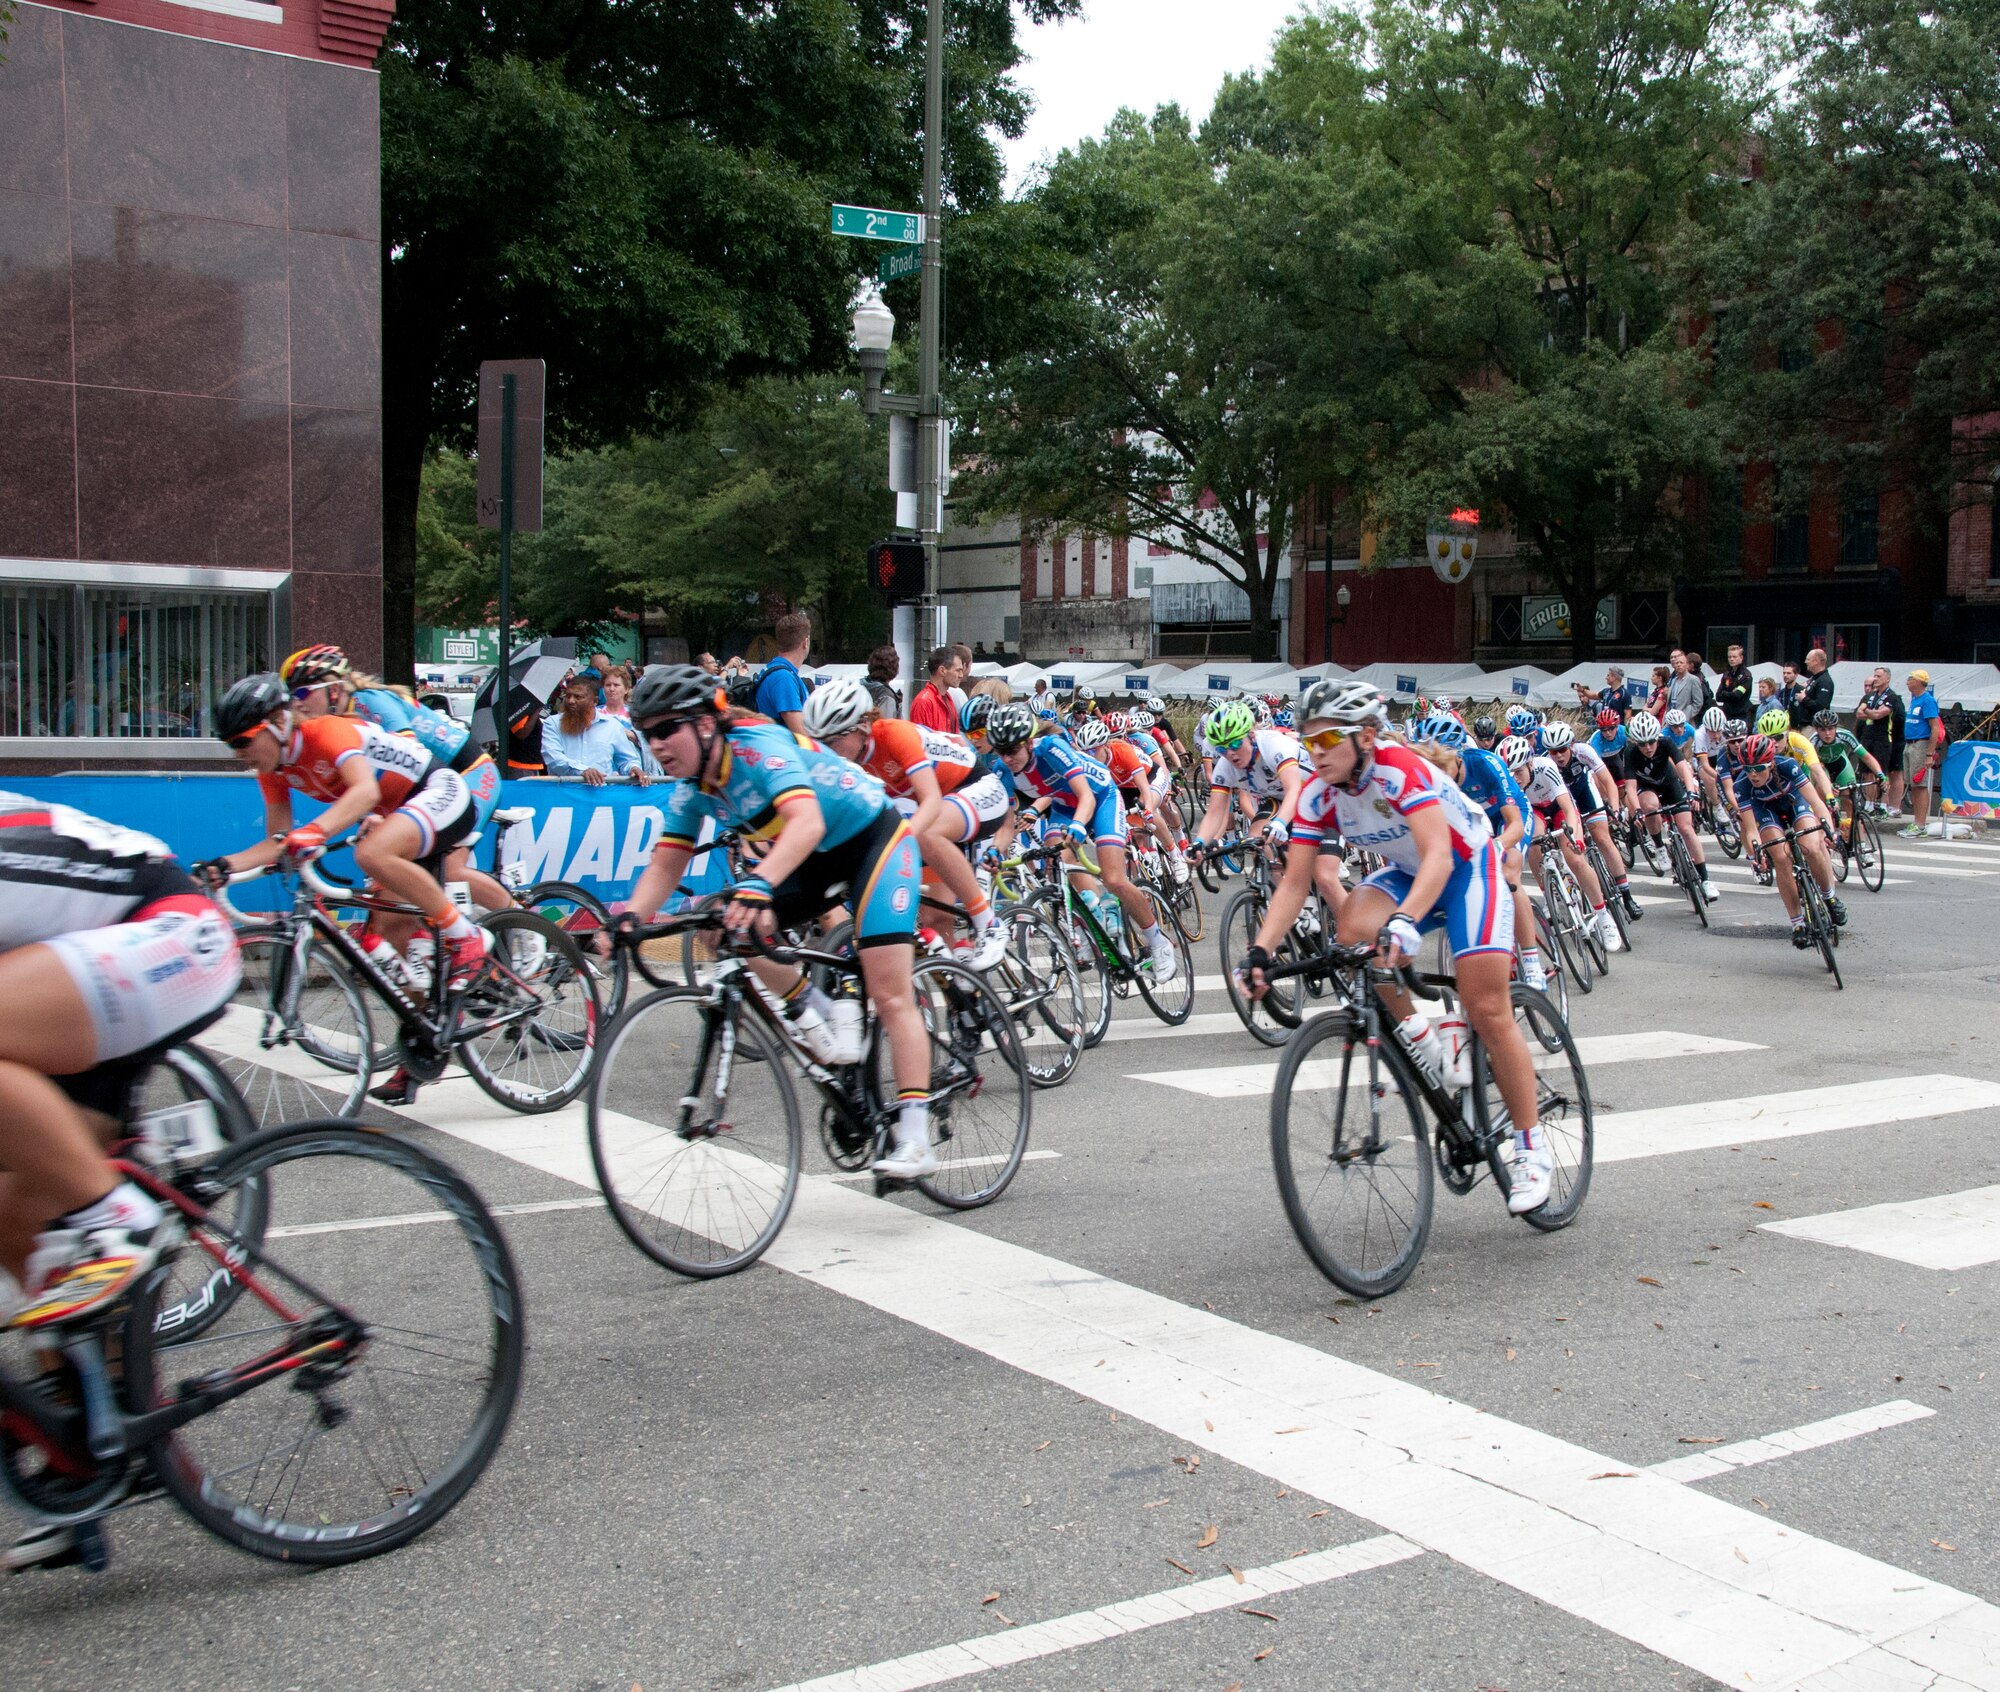 Weather forecasters from the Virginia Air National Guard, 192nd Fighter Wing, 200th Weather Flight, based at Joint Force Headquarters in Sandston, provided meteorological and planning support for the Union Cycliste Internationale Road World Cycling Championship in Richmond, Sept. 18-27, 2015. Richmond was the first U.S. city to host the UCI race since 1986 when it was held in Colorado Springs. (U.S. Air National Guard photo by MSgt. Carlos J. Claudio/Released)